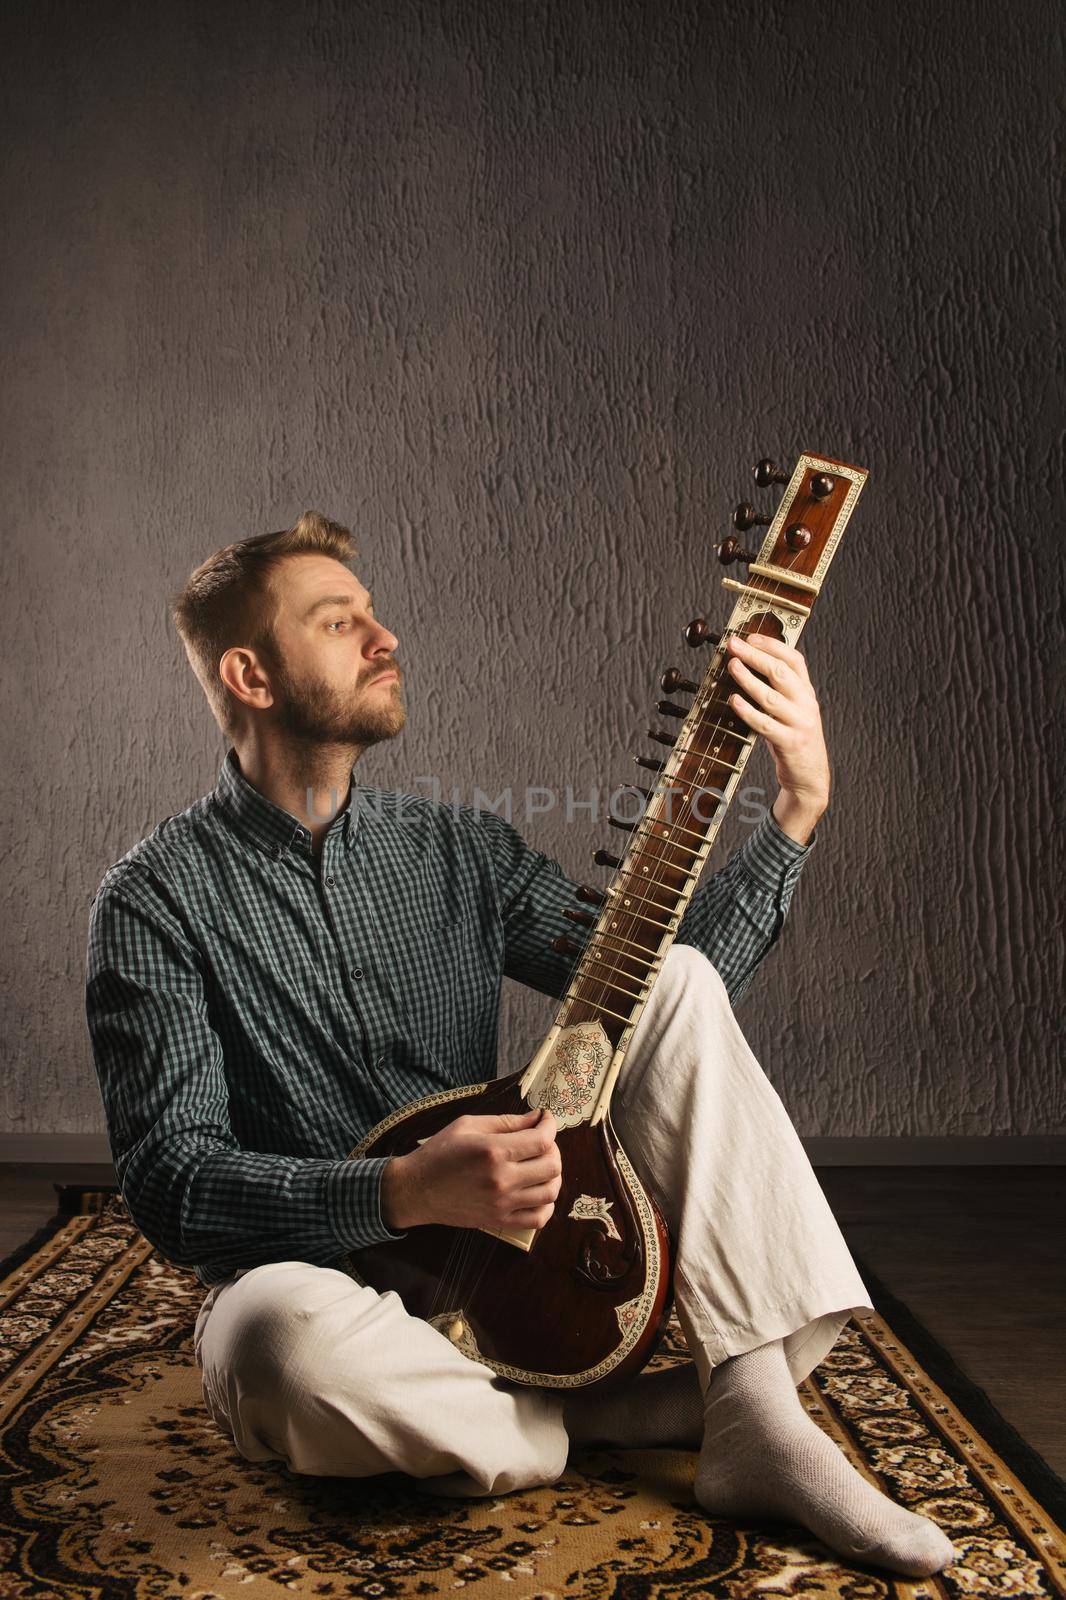 Portrait of a European man playing the sitar sitting on the carpet- Image